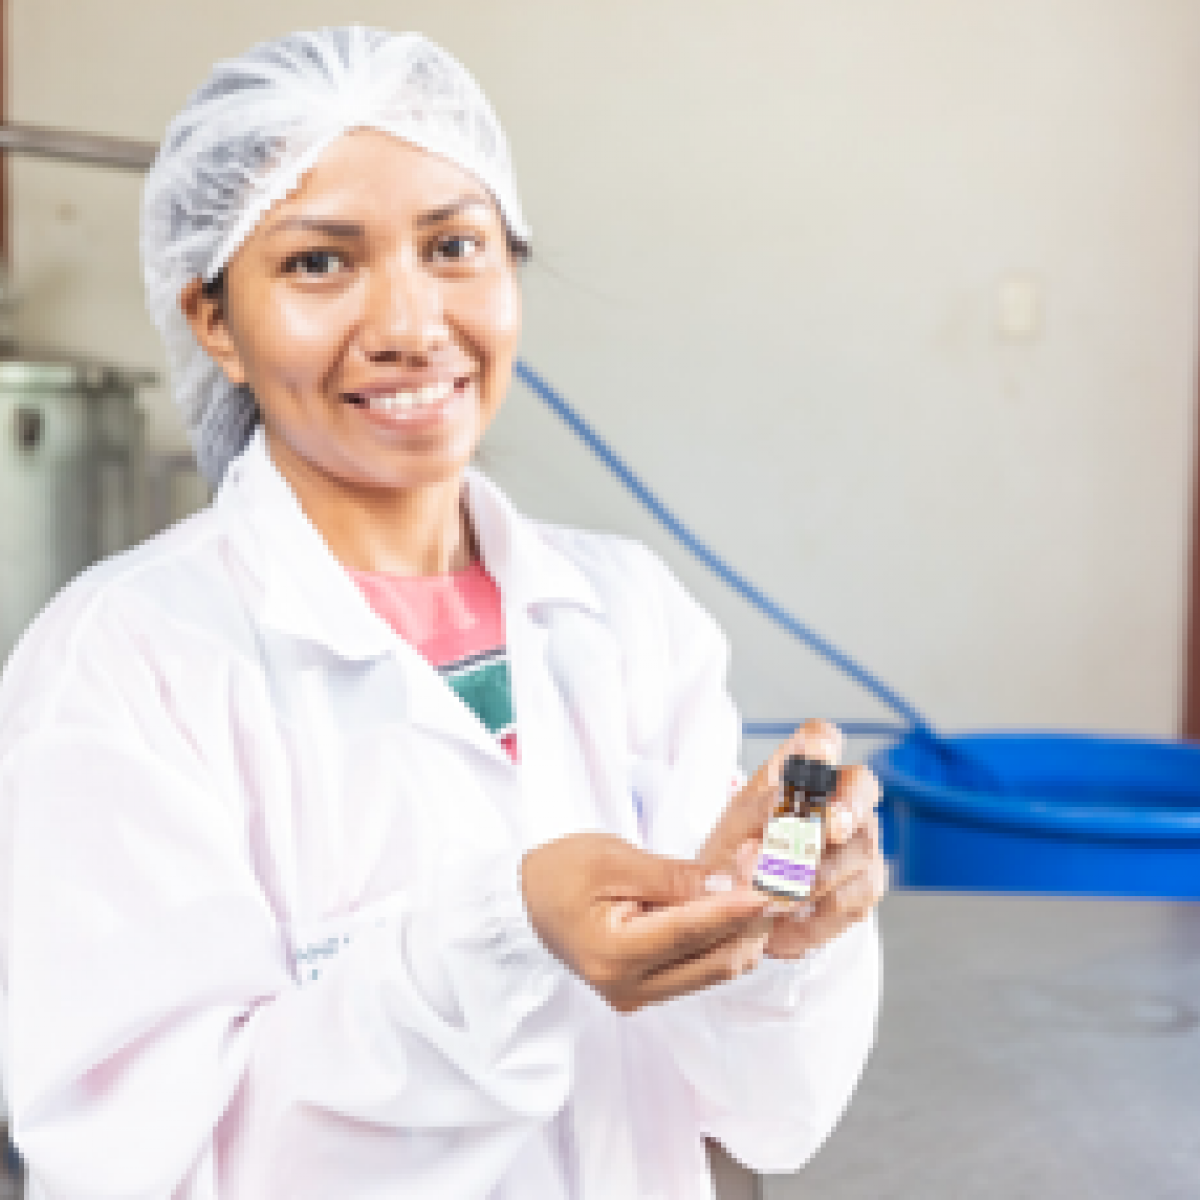 A woman dressed in a lab coat is holding a bottle of Amazonian essential oil